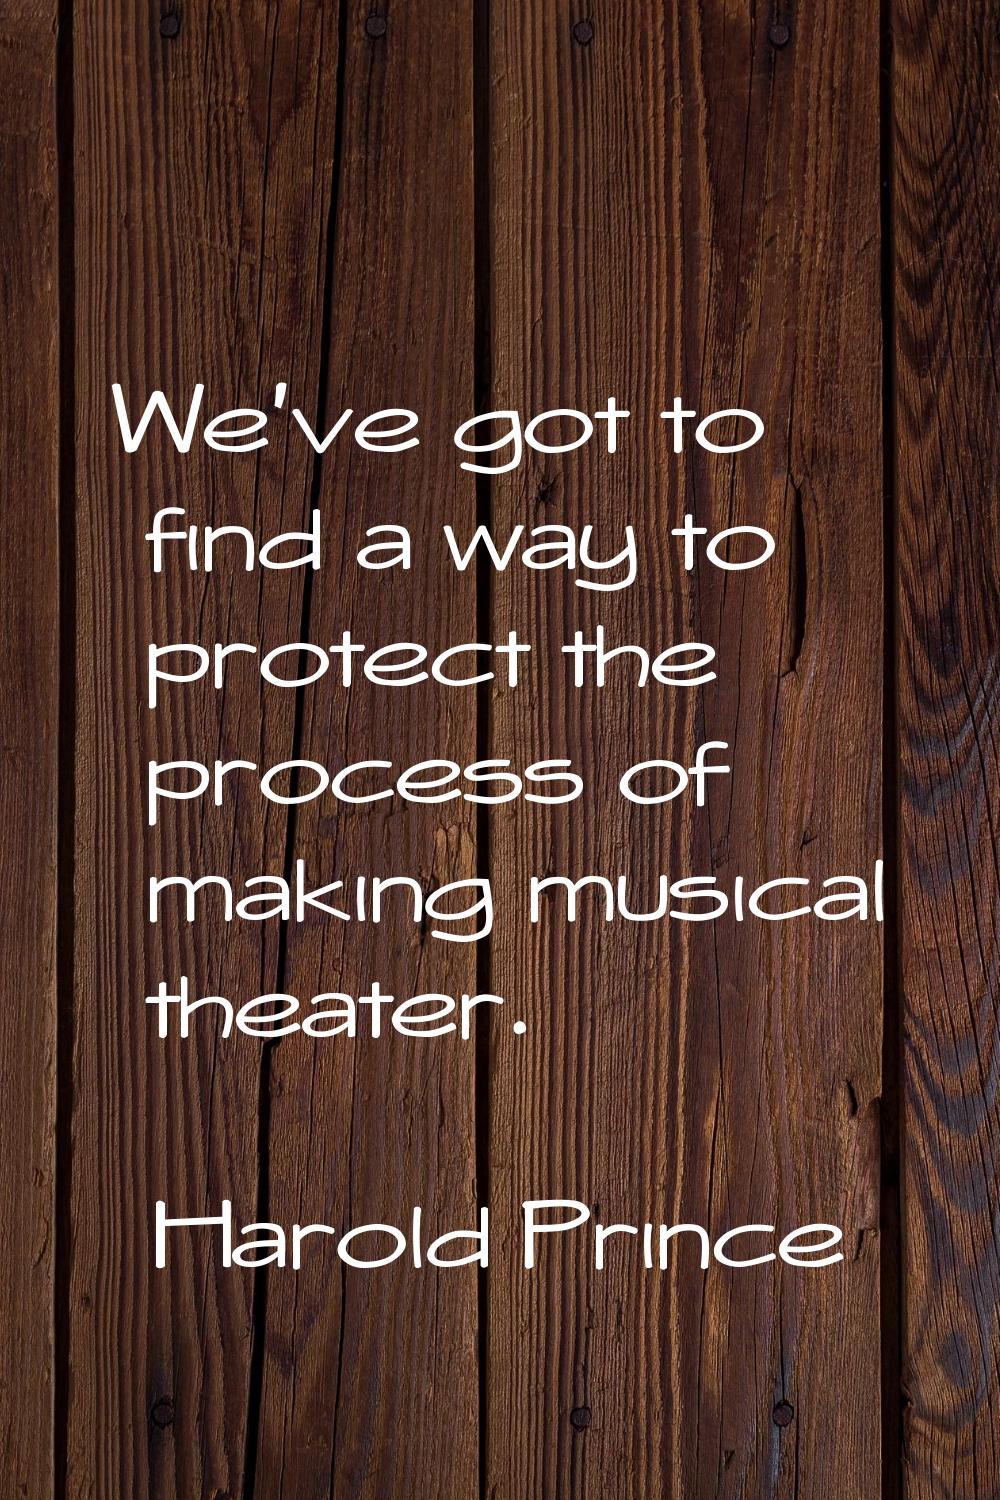 We've got to find a way to protect the process of making musical theater.